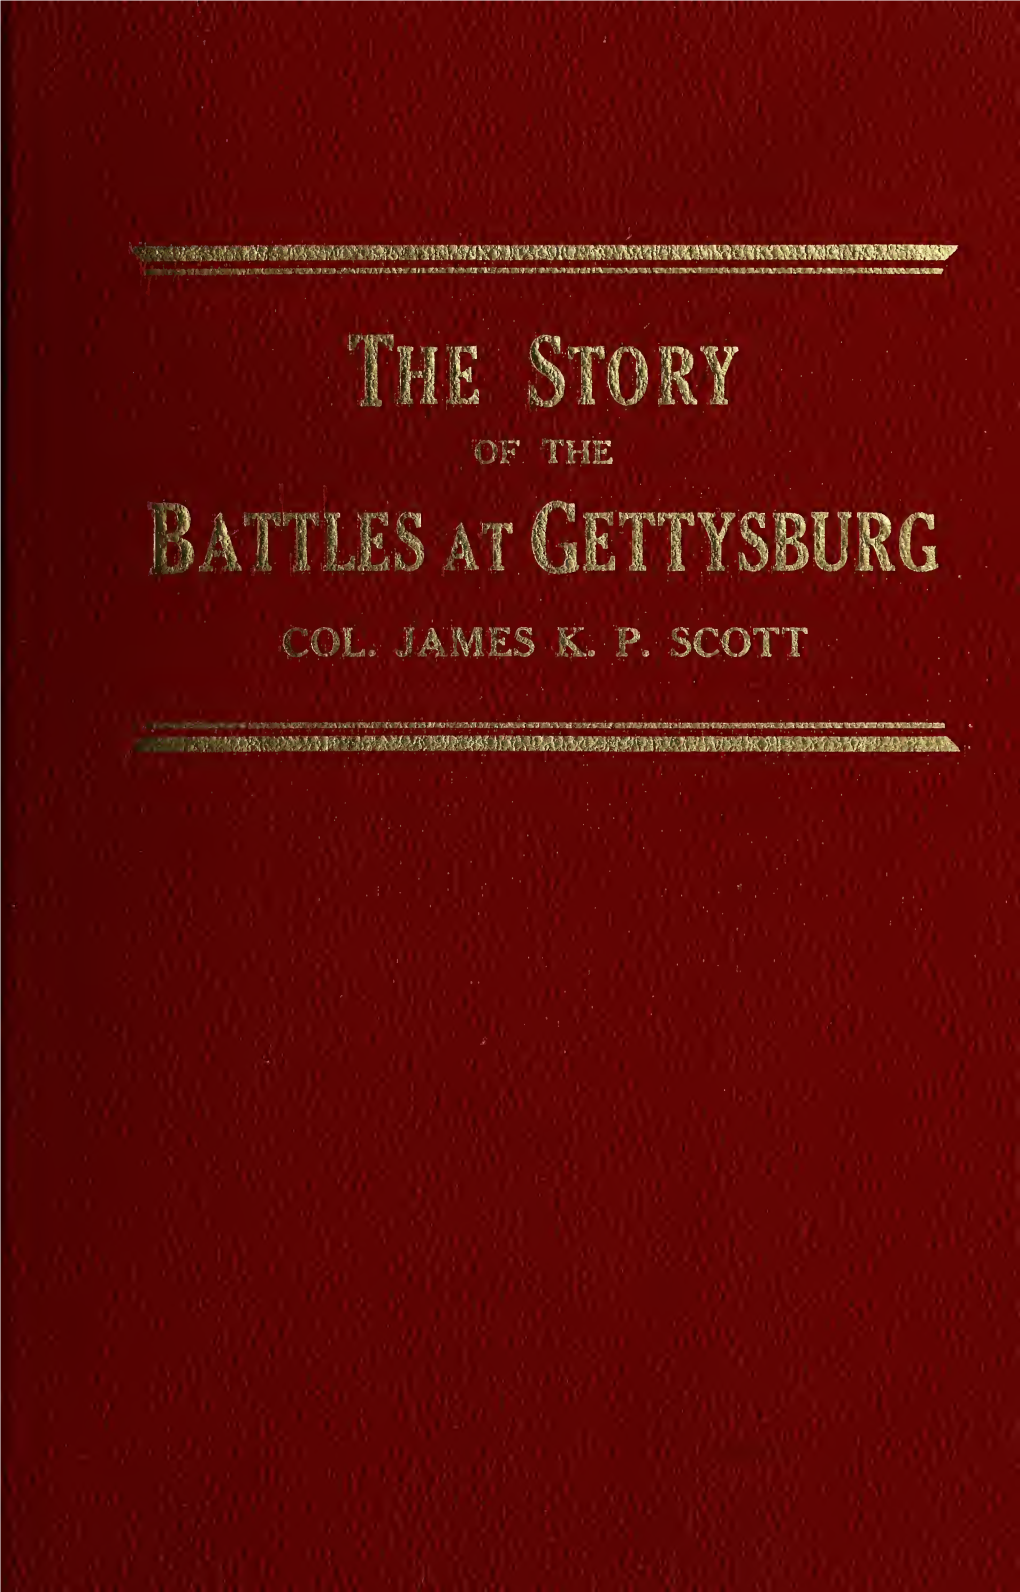 The Story of the Battles at Gettysburg (1927)